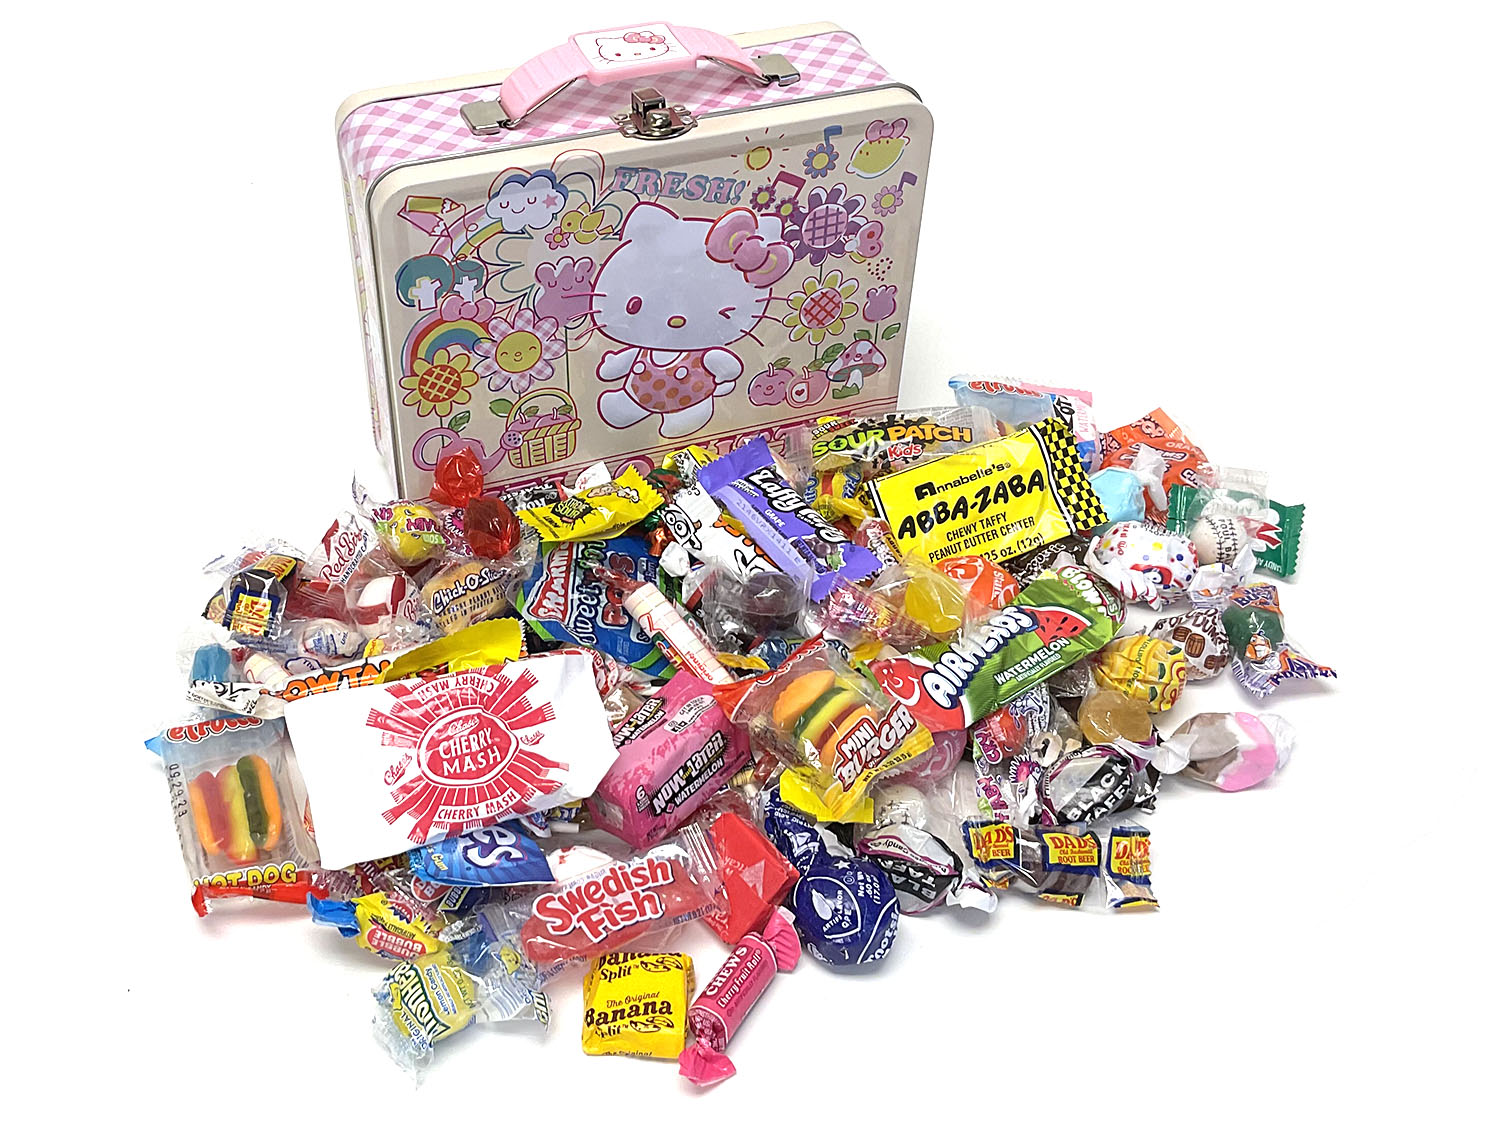 Hello Kitty® Classic Lunch Box For Teens